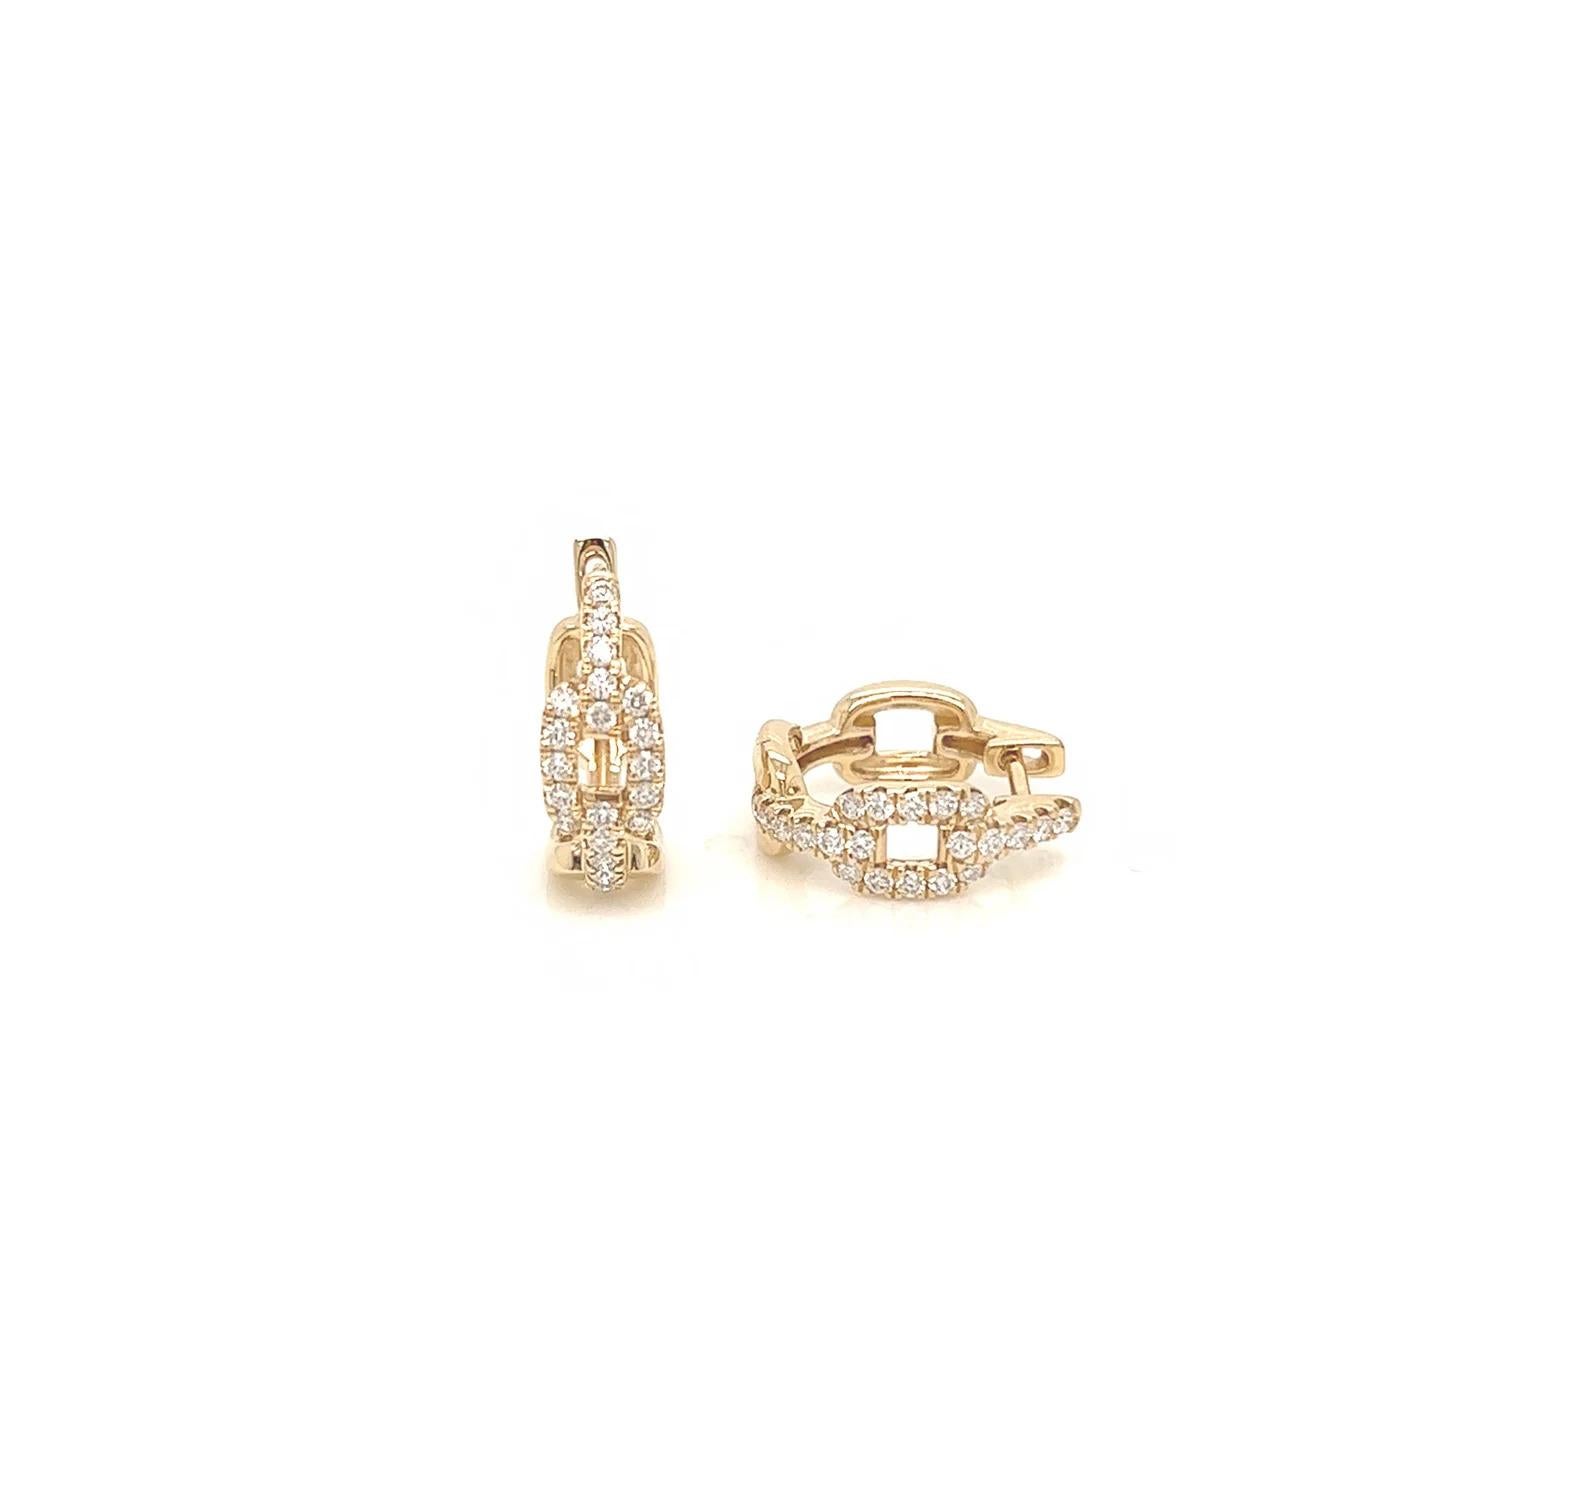 0.30 Carat Diamond Pave-Set Hoop Earrings in 14K Yellow Gold

Excellent as a gift for many occasions as anniversary, graduation, Christmas, birthday, etc. The buckle shape design is unique and dazzling, elegant and sophisticated for the practical